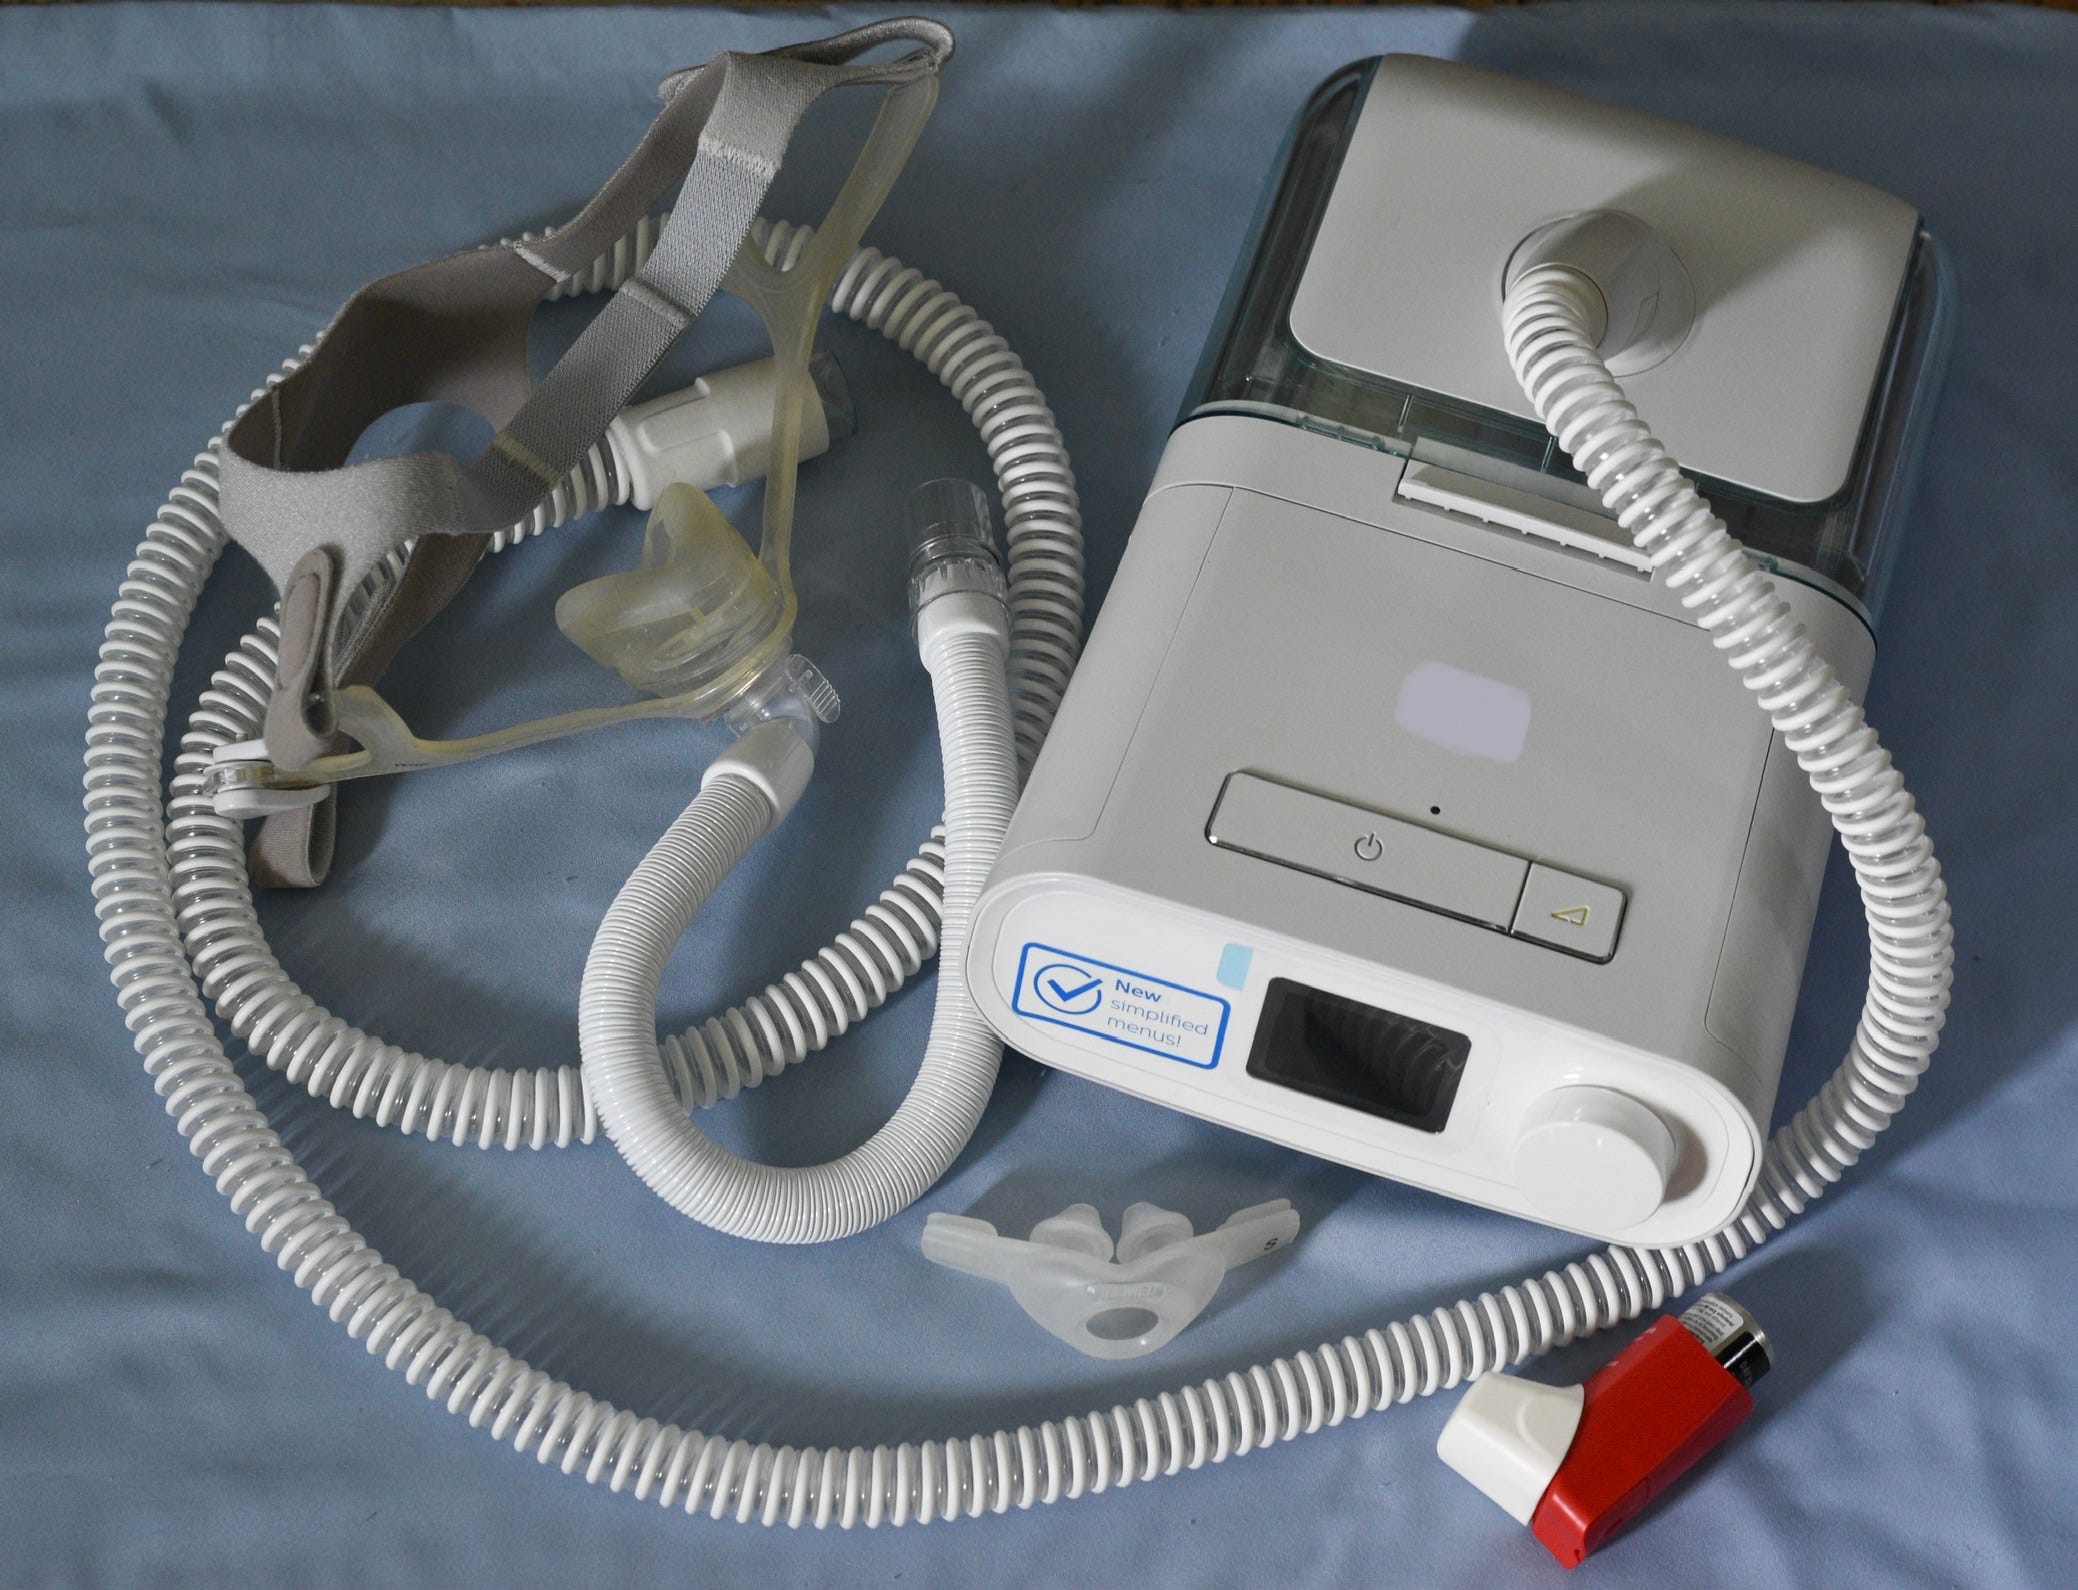 cpap maker phillips enters consent decree that stops company from selling machines